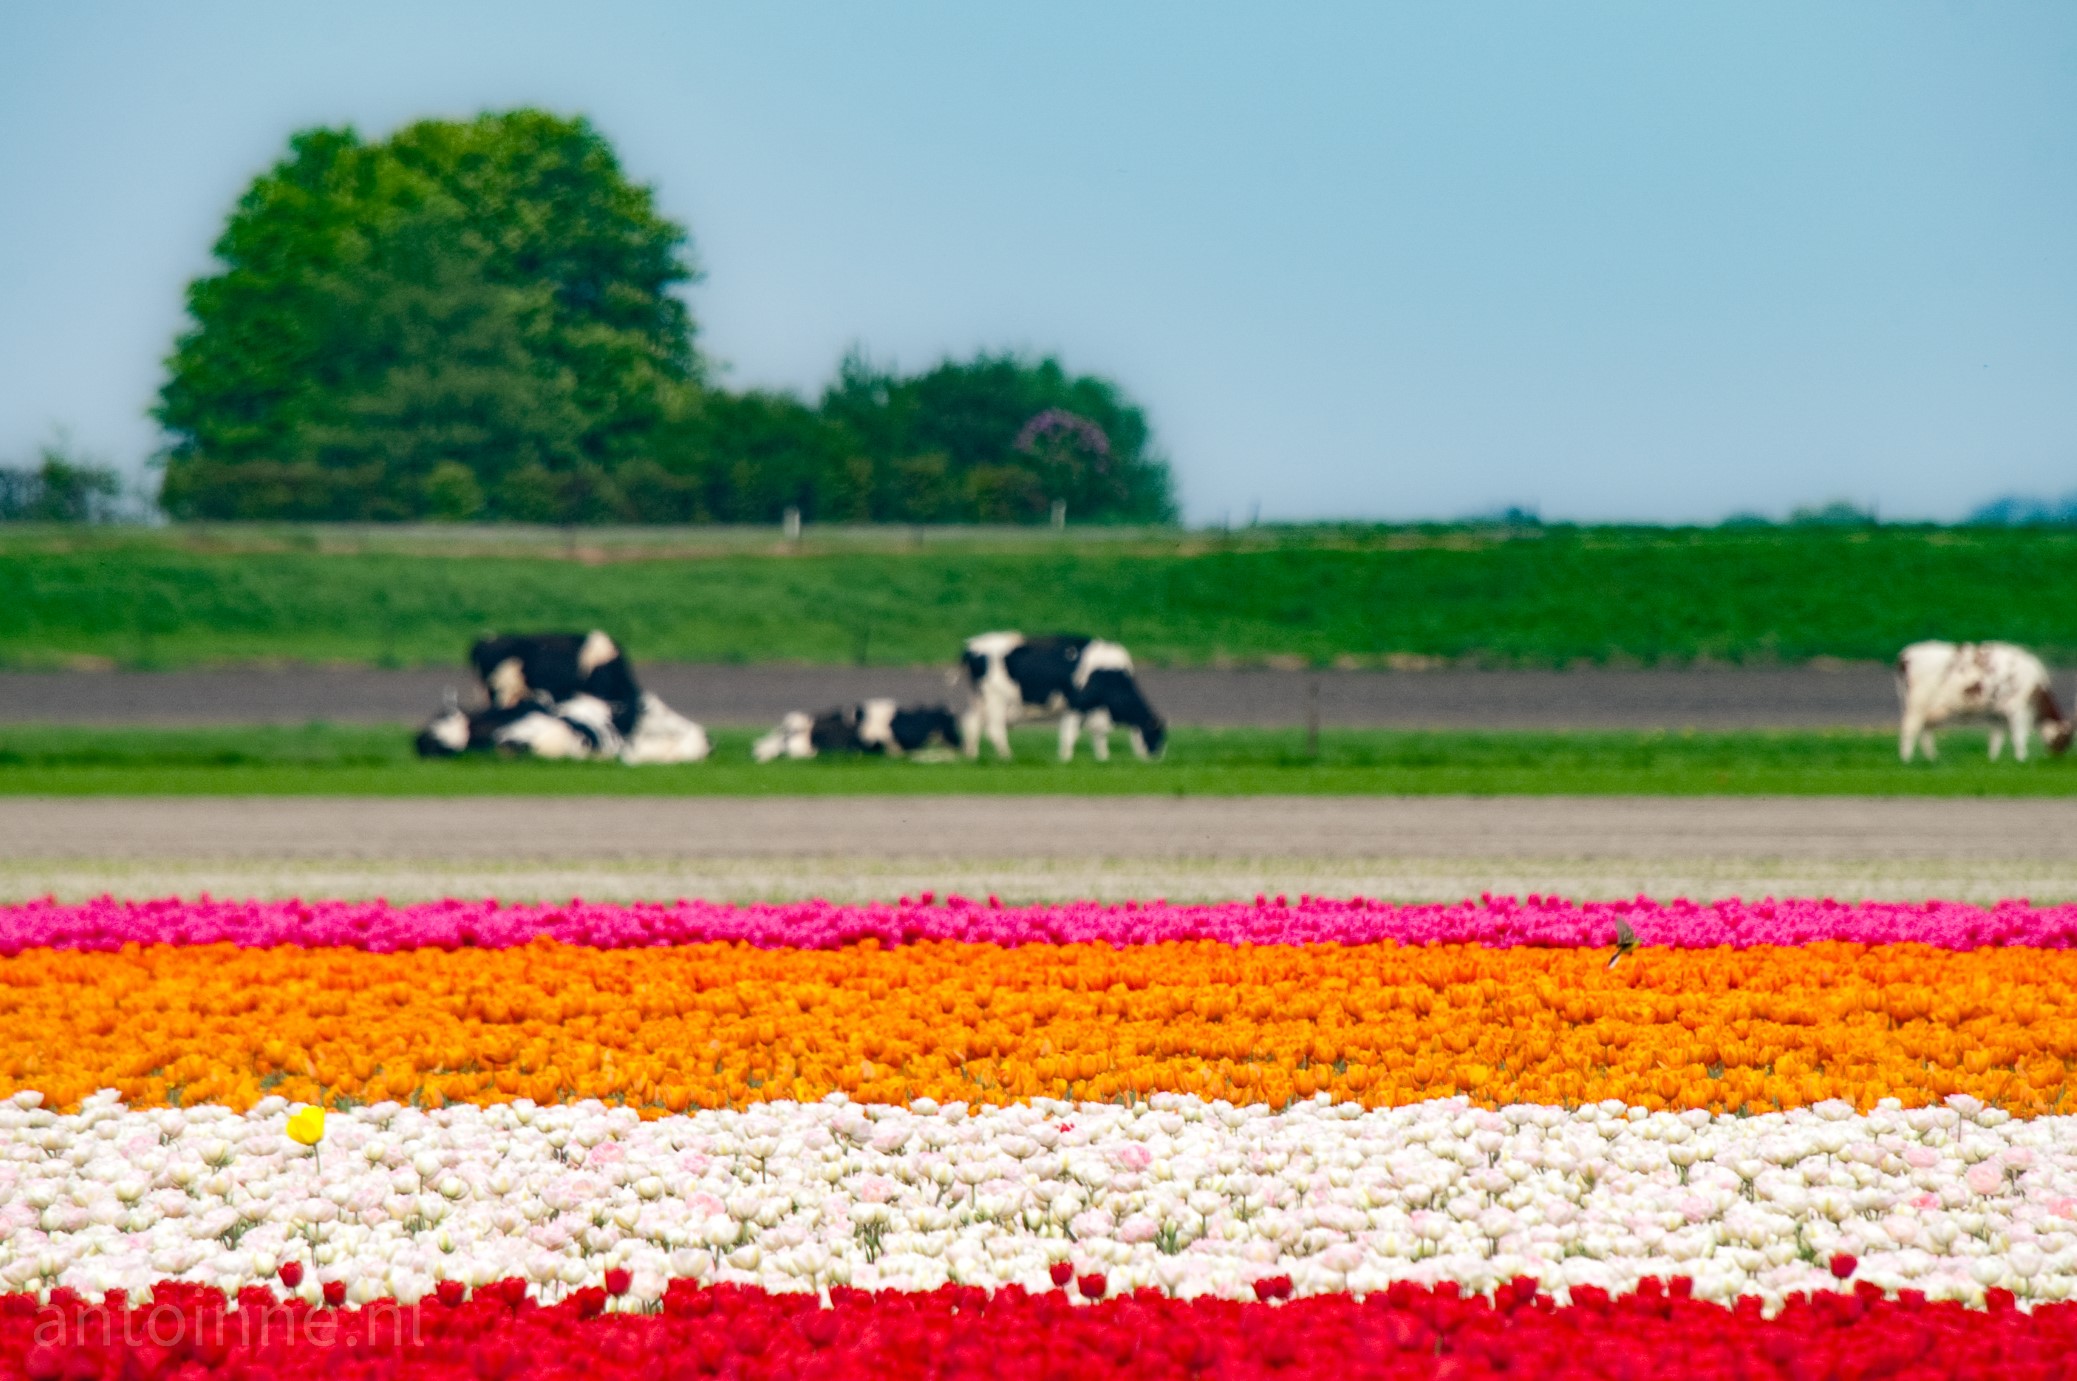 You are in Holland, looking at a field covered with rows of red, white, orange and purple tulips. A tiny yellow wagtail emerges from between the bulbs. In the background is a meadow where cows are grazing. Some trees can be seen behind the dike protecting the polder.